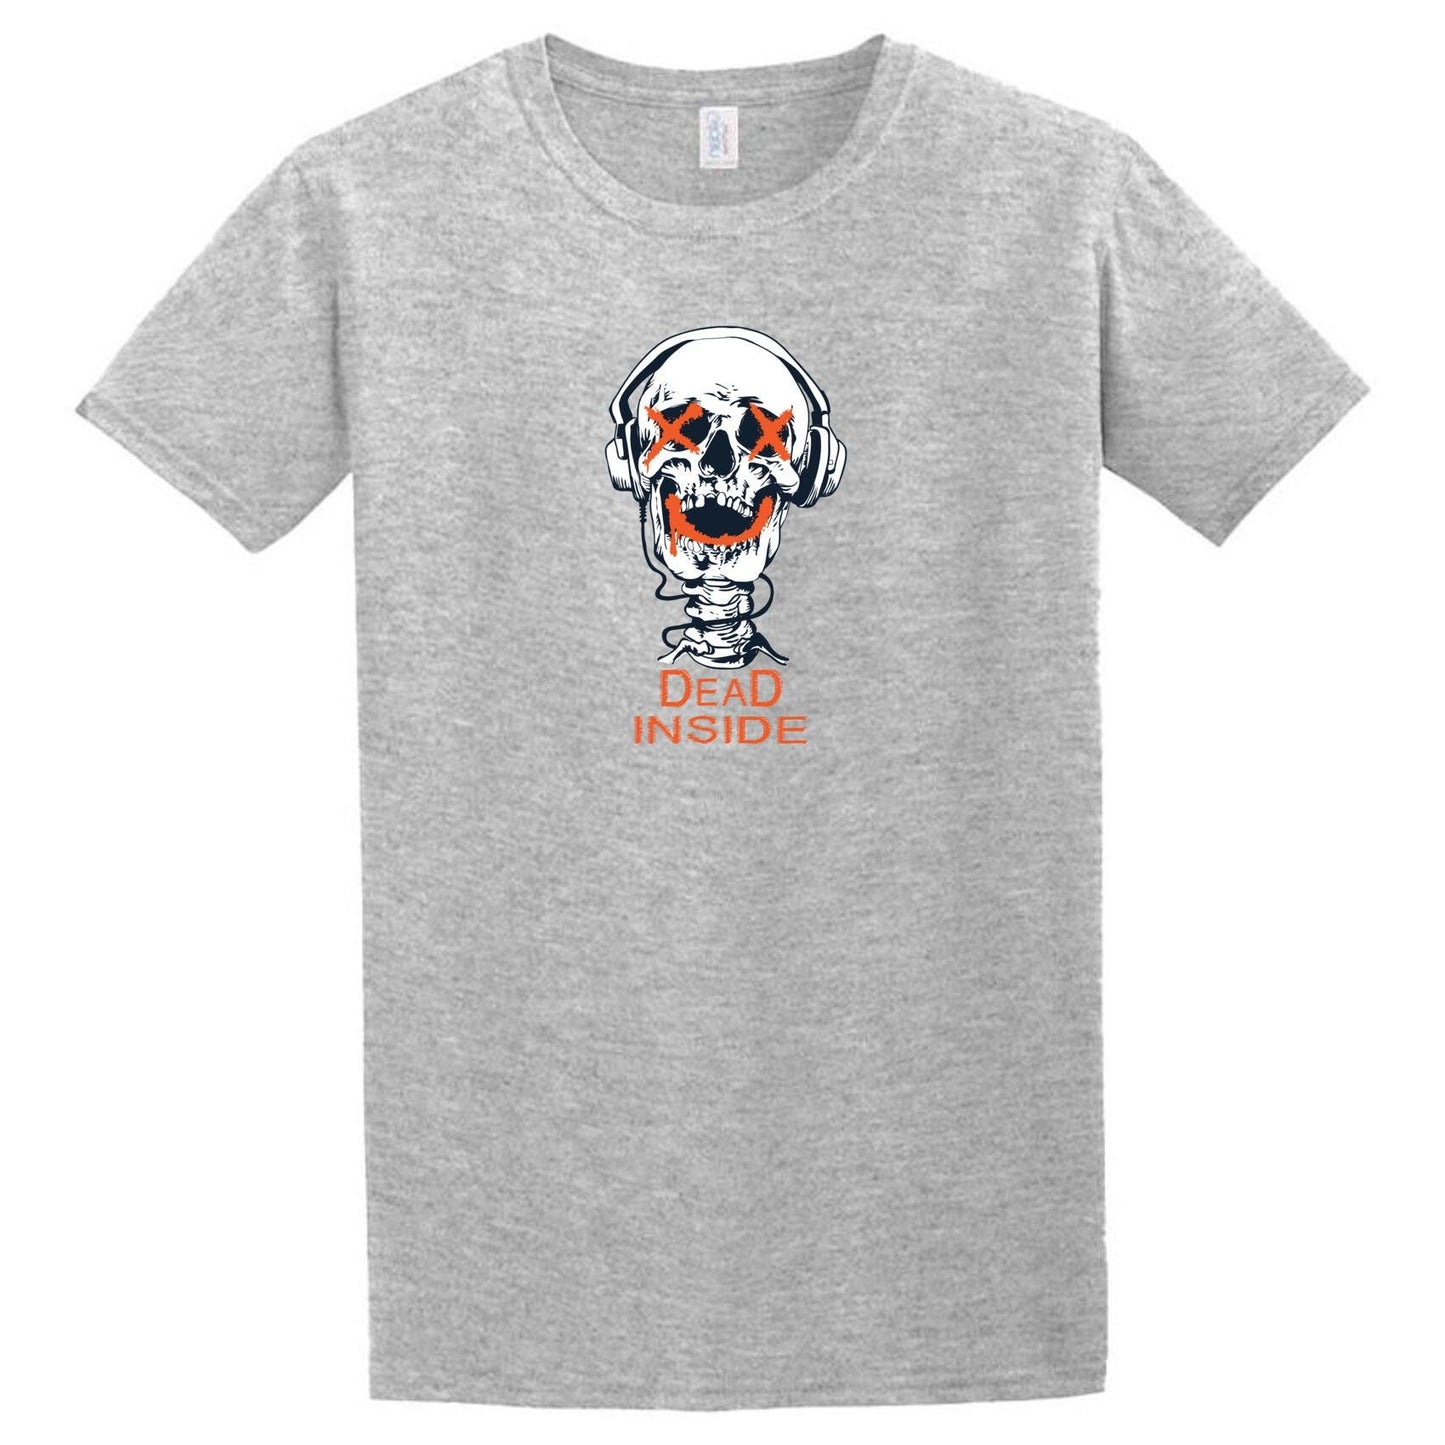 A Dead Inside T-Shirt with an orange skull on it, from Twisted Gifts.